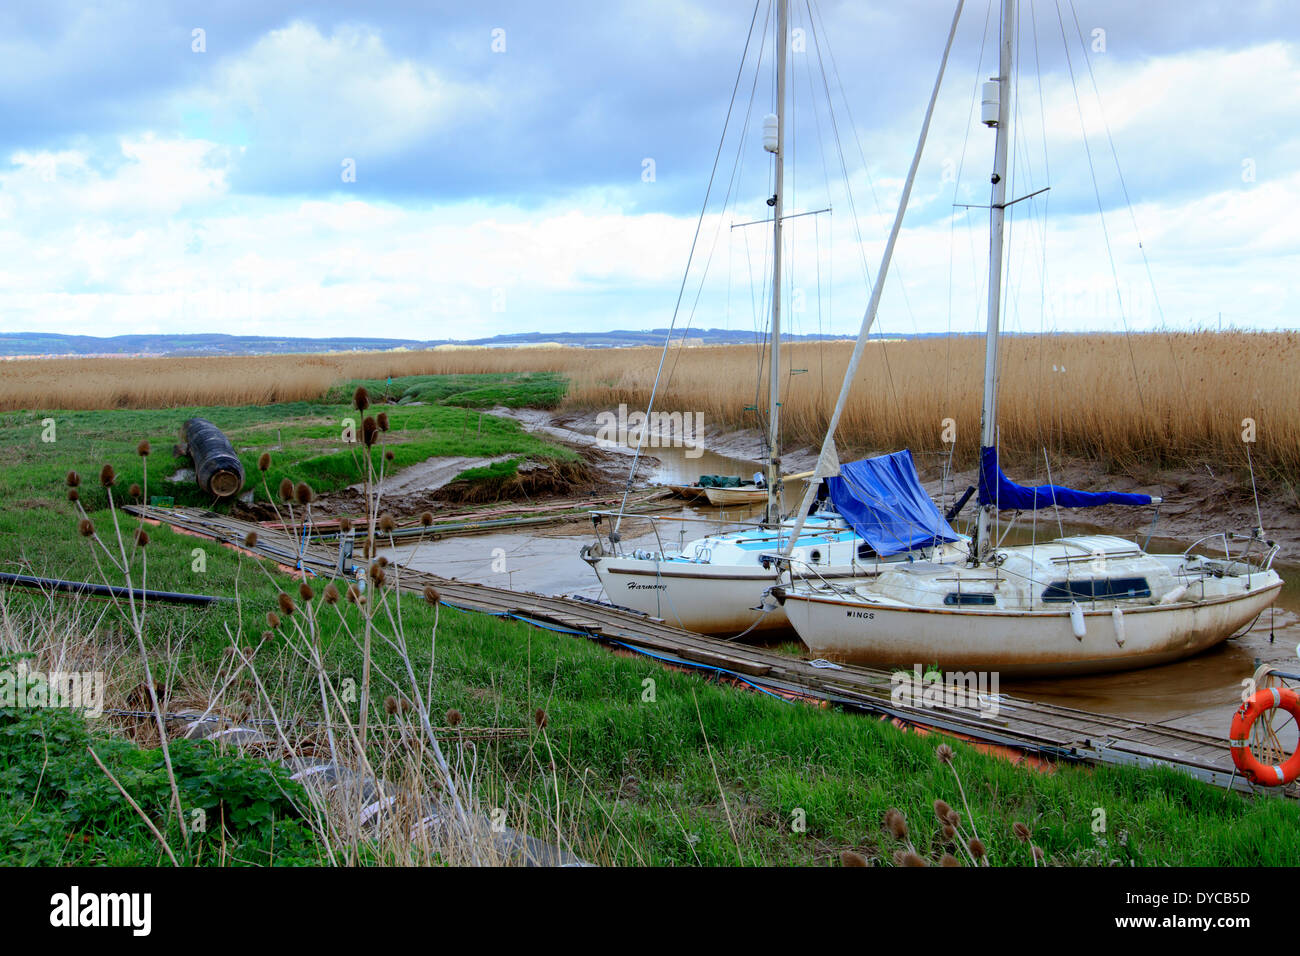 This is where the Romans crossed the river Humber at 'Flashmire' North Lincolnshre. 1 of 13 images. Stock Photo